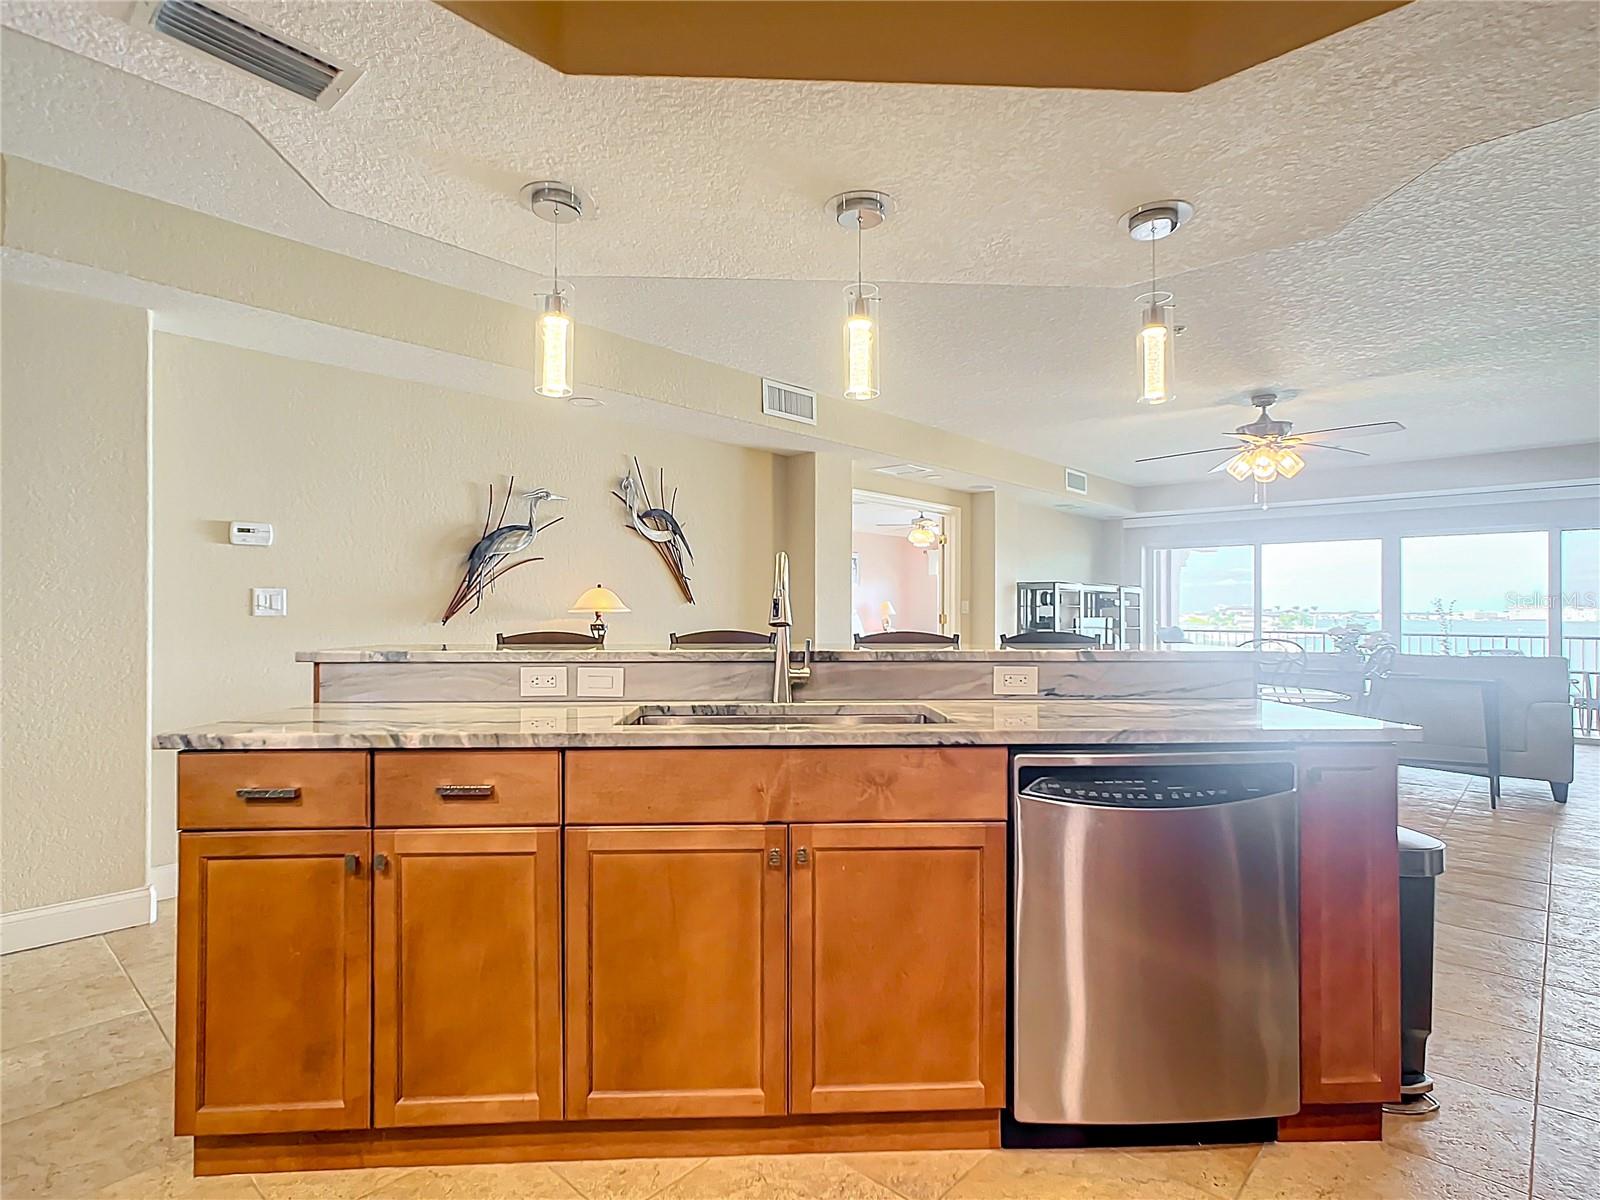 Your kitchen island offers additional storage & counter space.